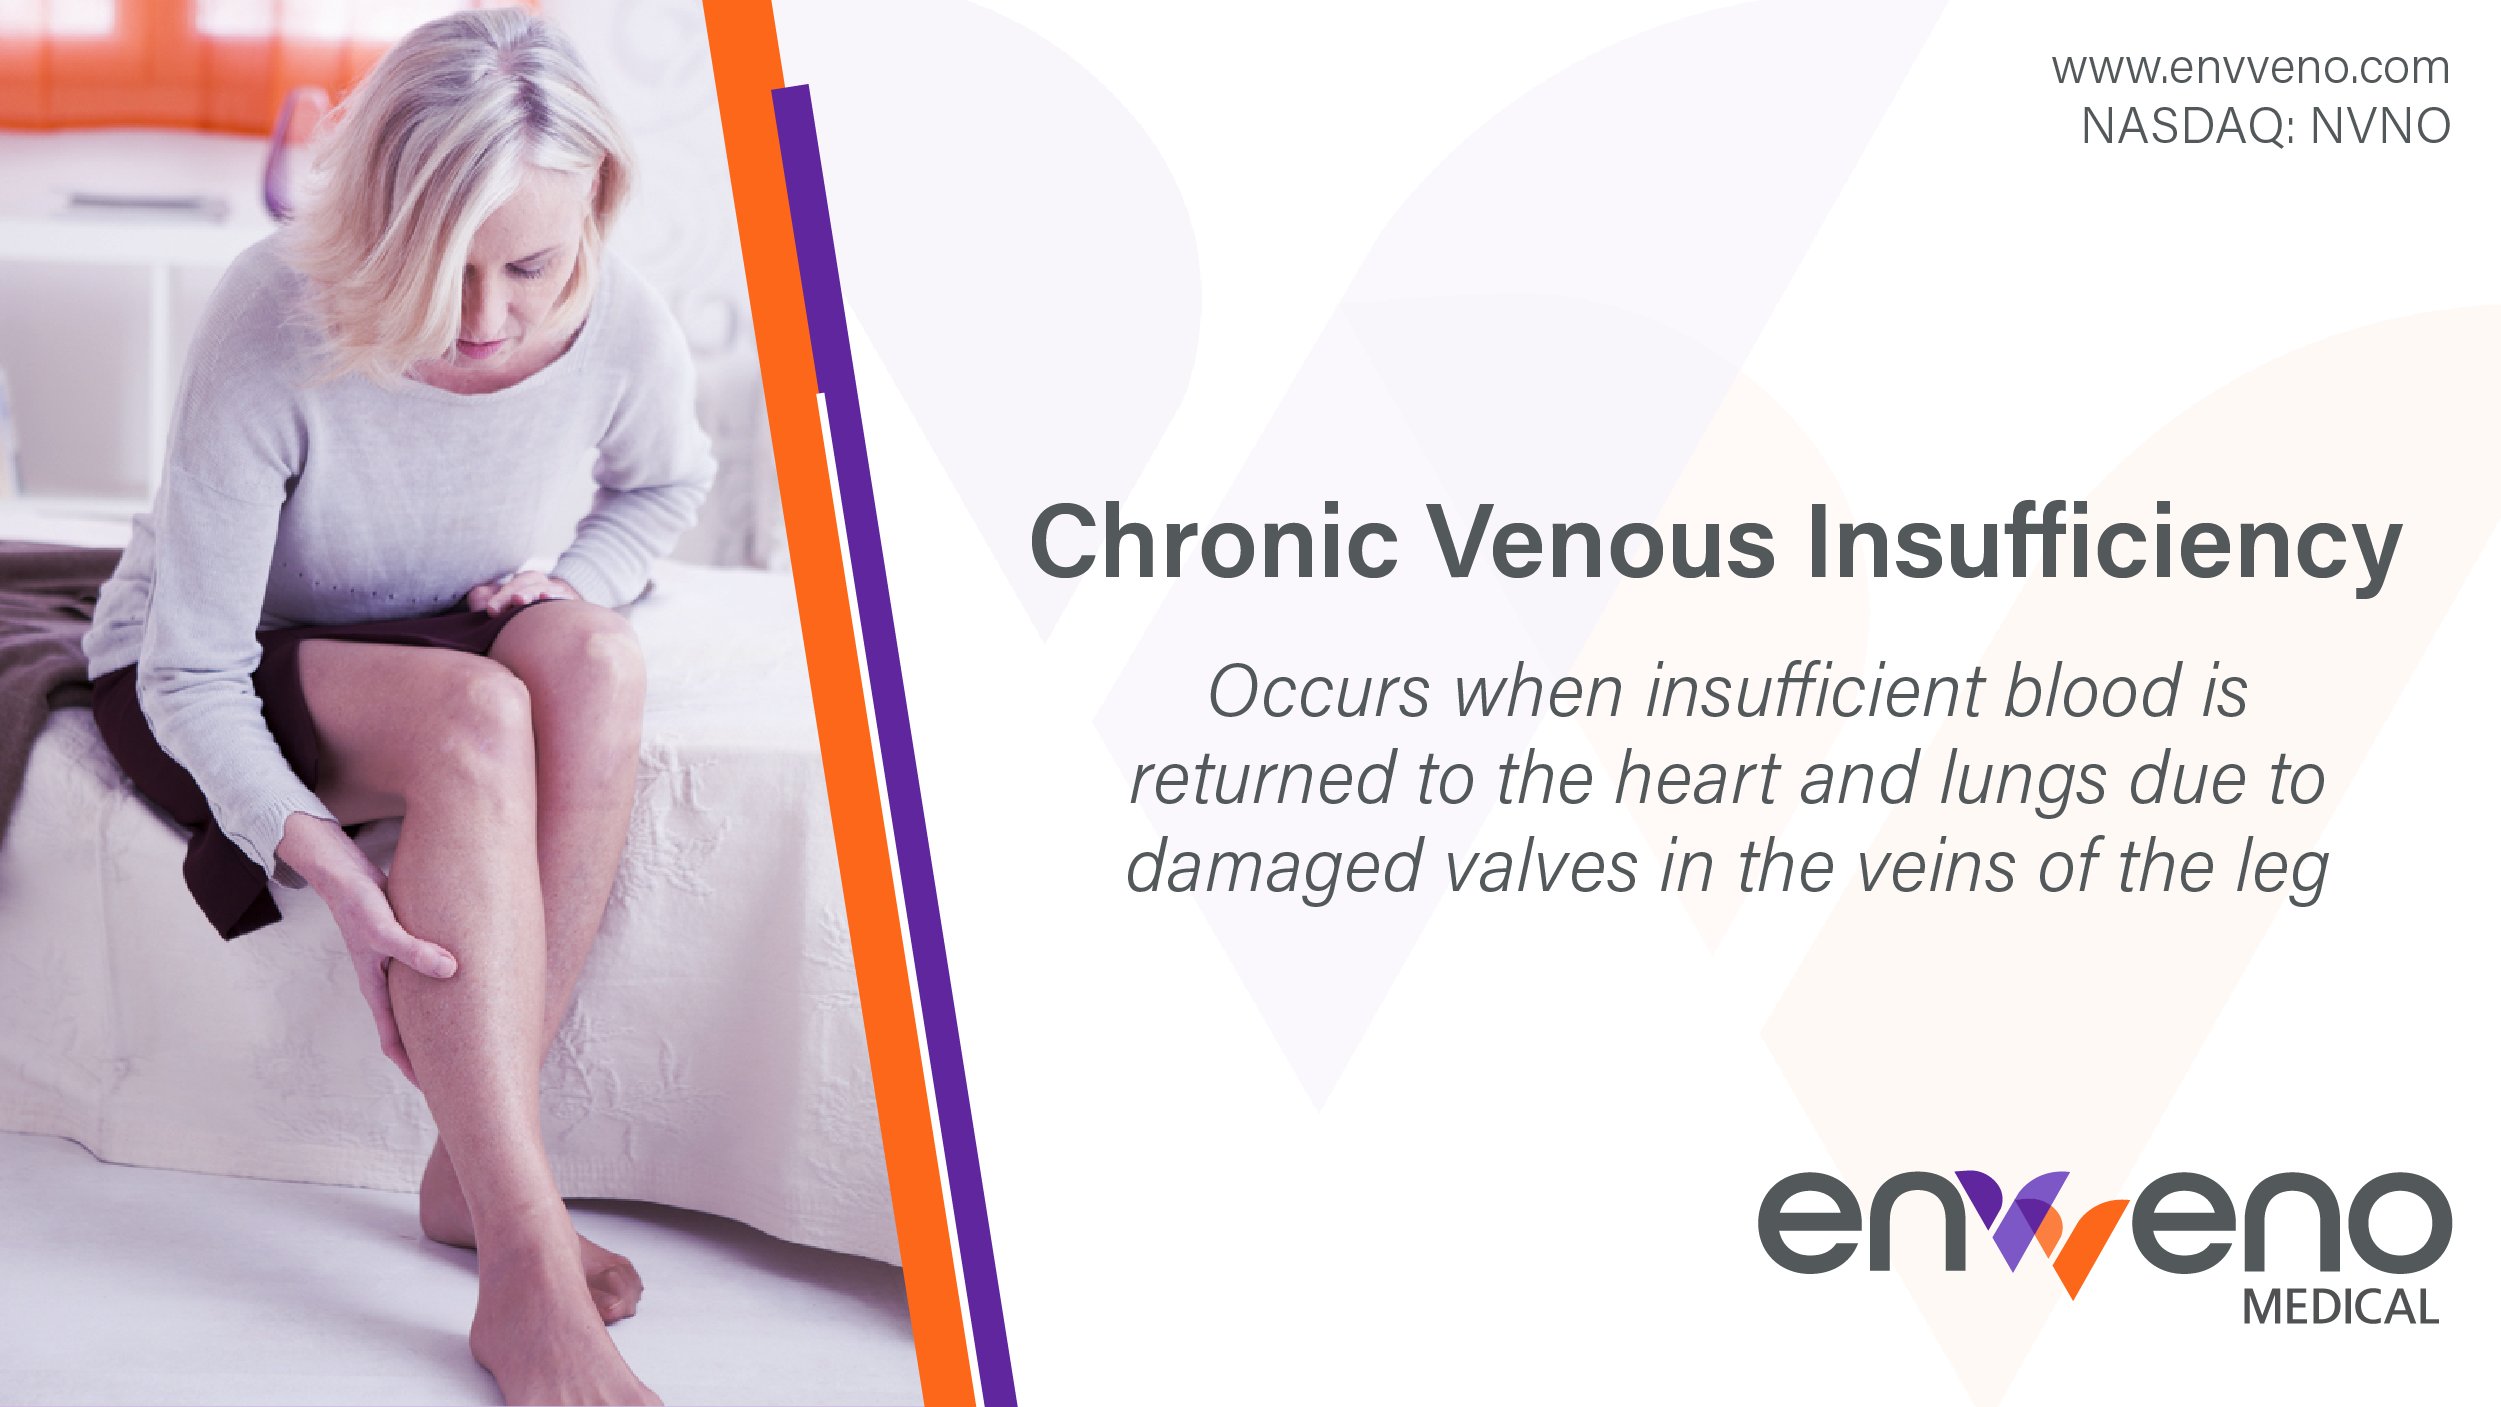 enVVeno Medical on X: Chronic Venous Insufficiency occurs when